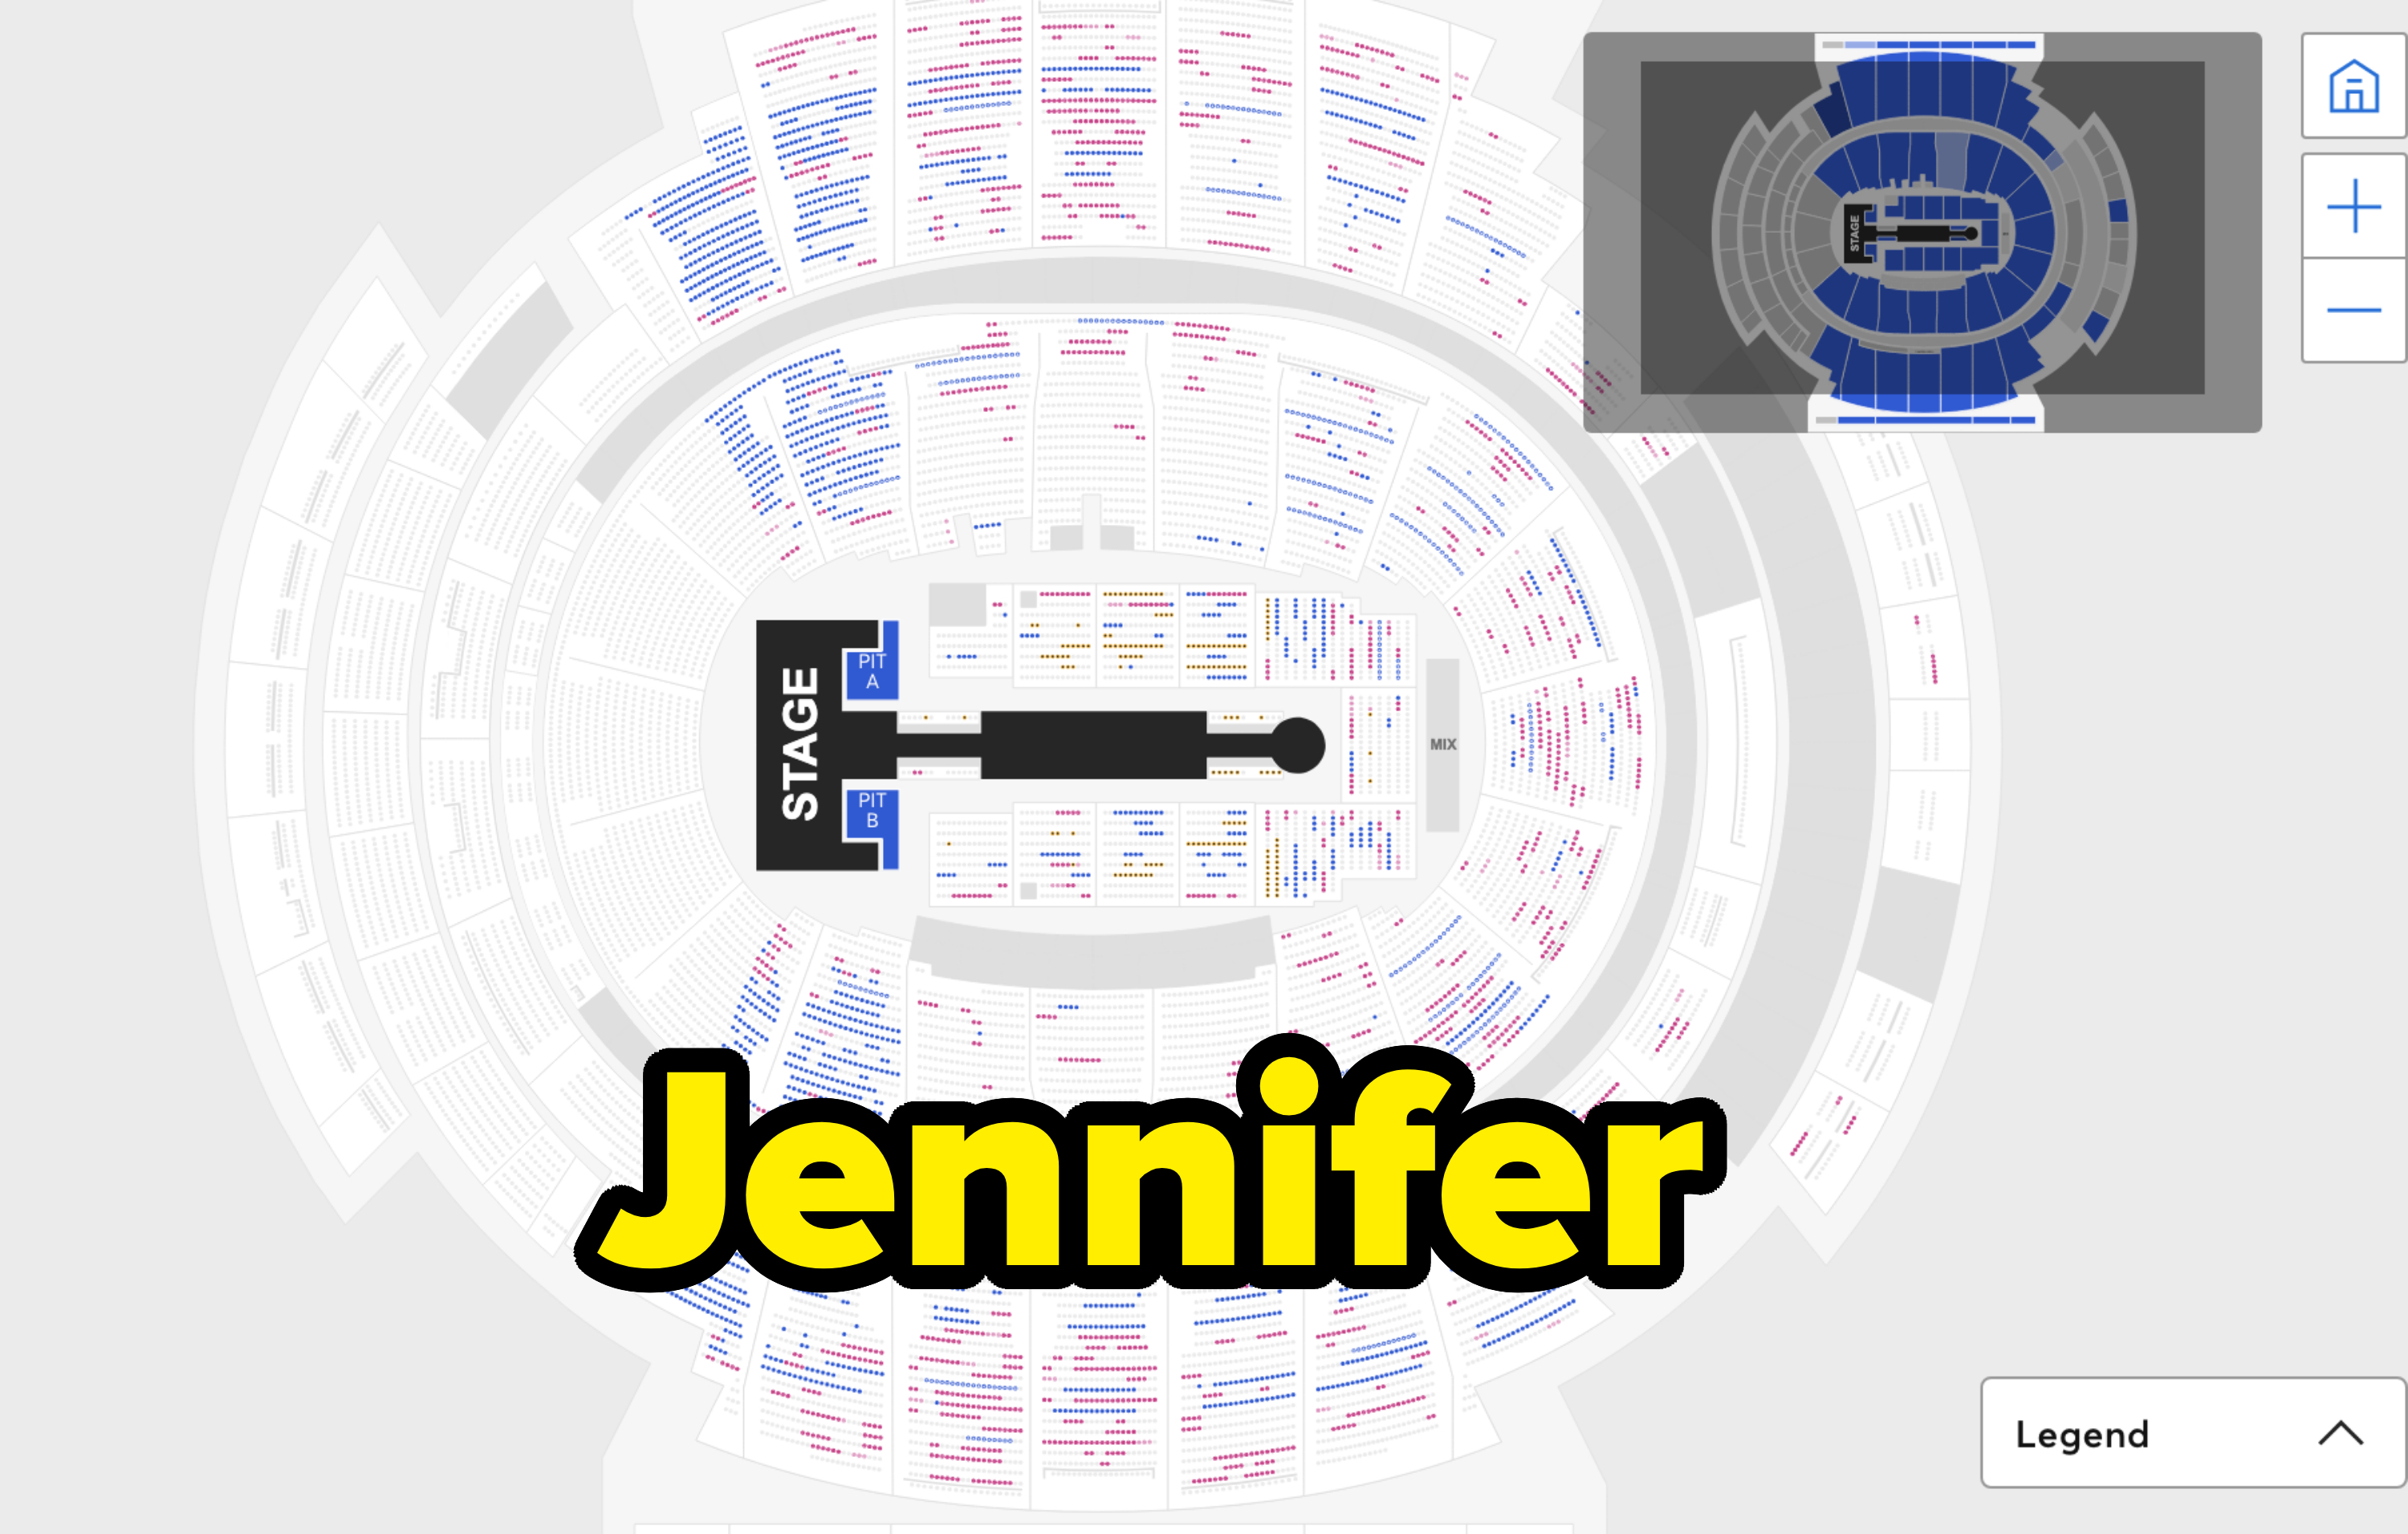 Seating chart for an event with stage placement, sections, rows, and seat numbers displayed